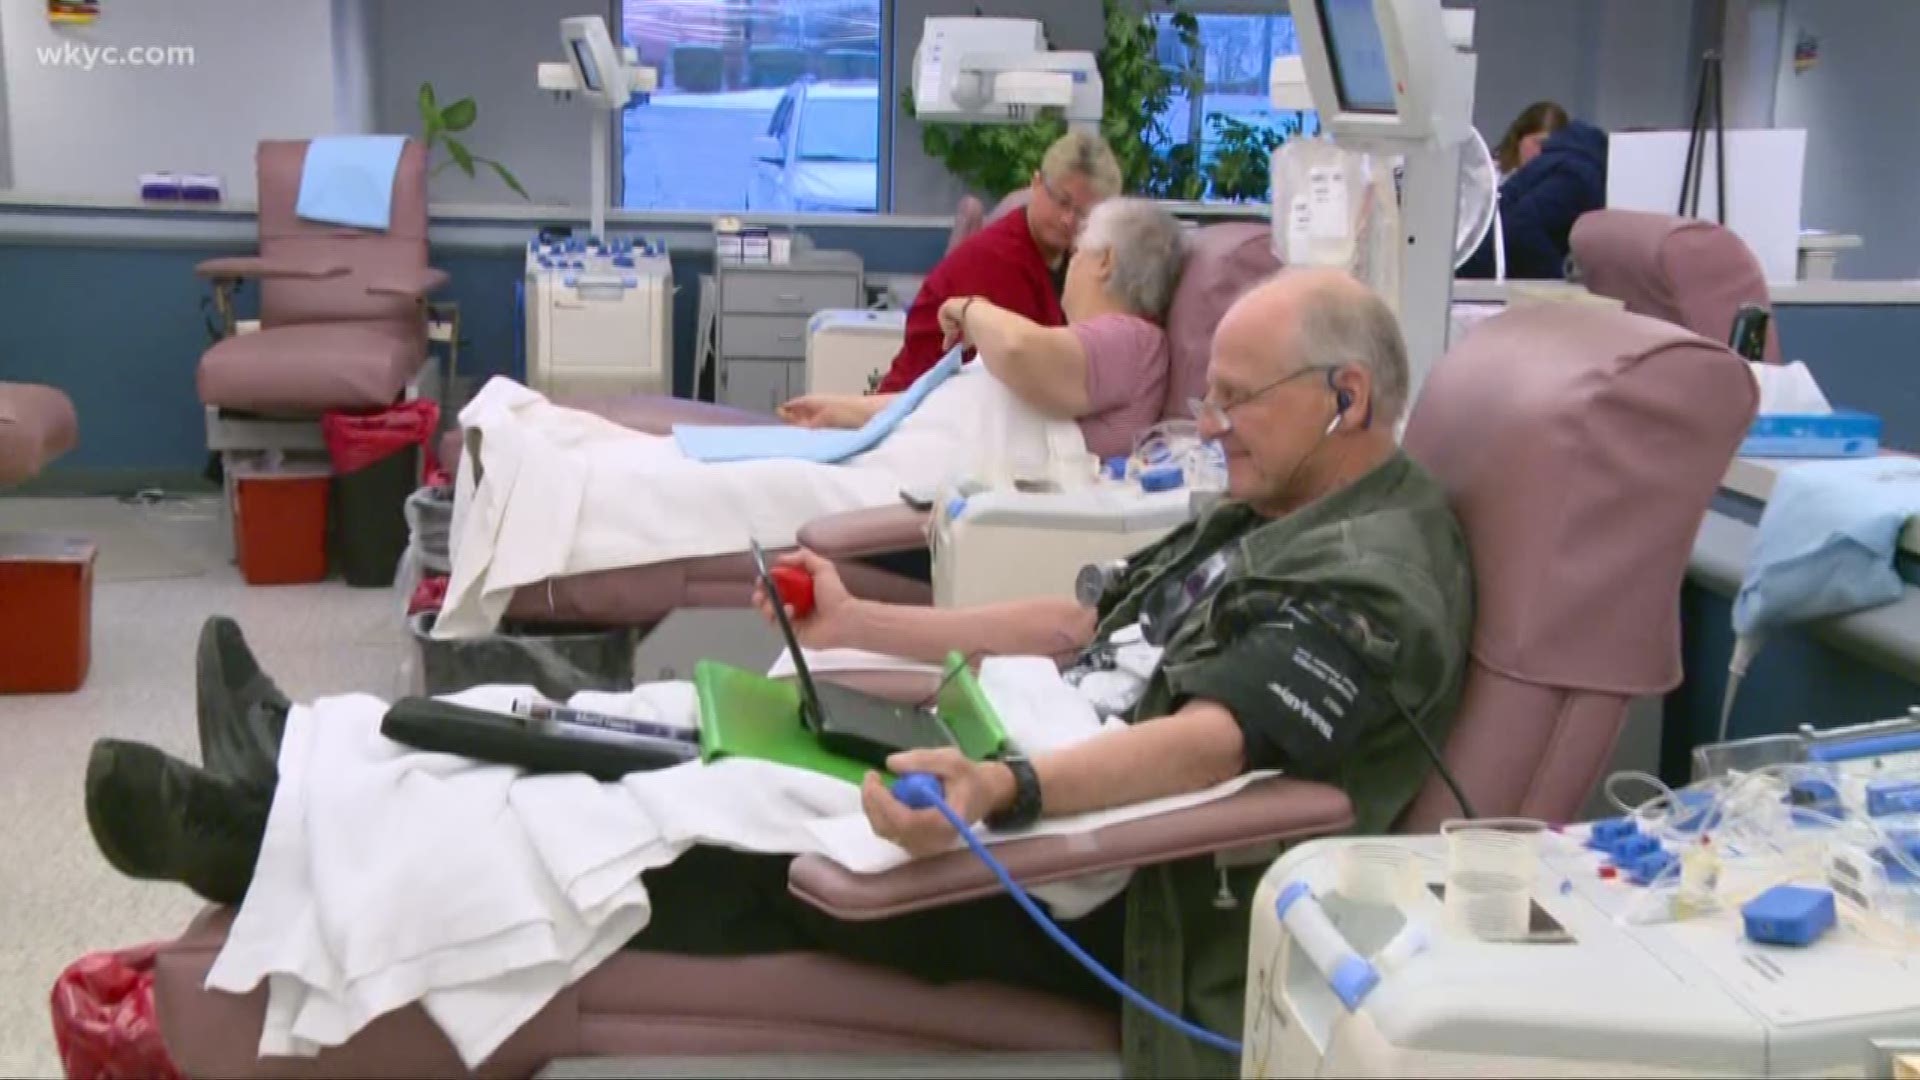 July 9, 2018: There is a critical need for blood donations as the American Red Cross announces a shortage.